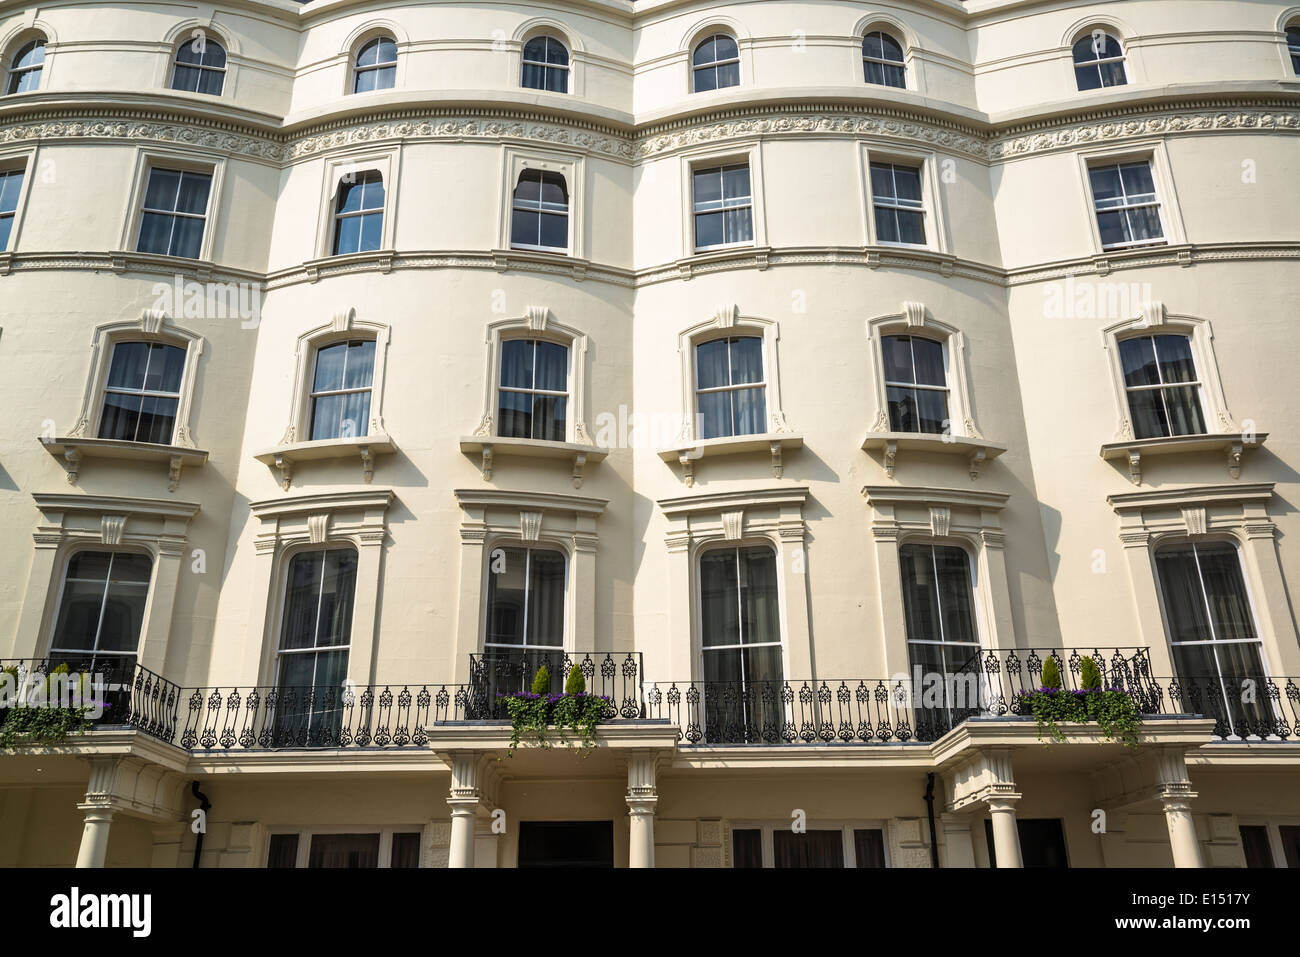 Grand Plaza Bayswater Serviced Apartments, Princes Square, City of Westminster, London W2, Regno Unito Foto Stock